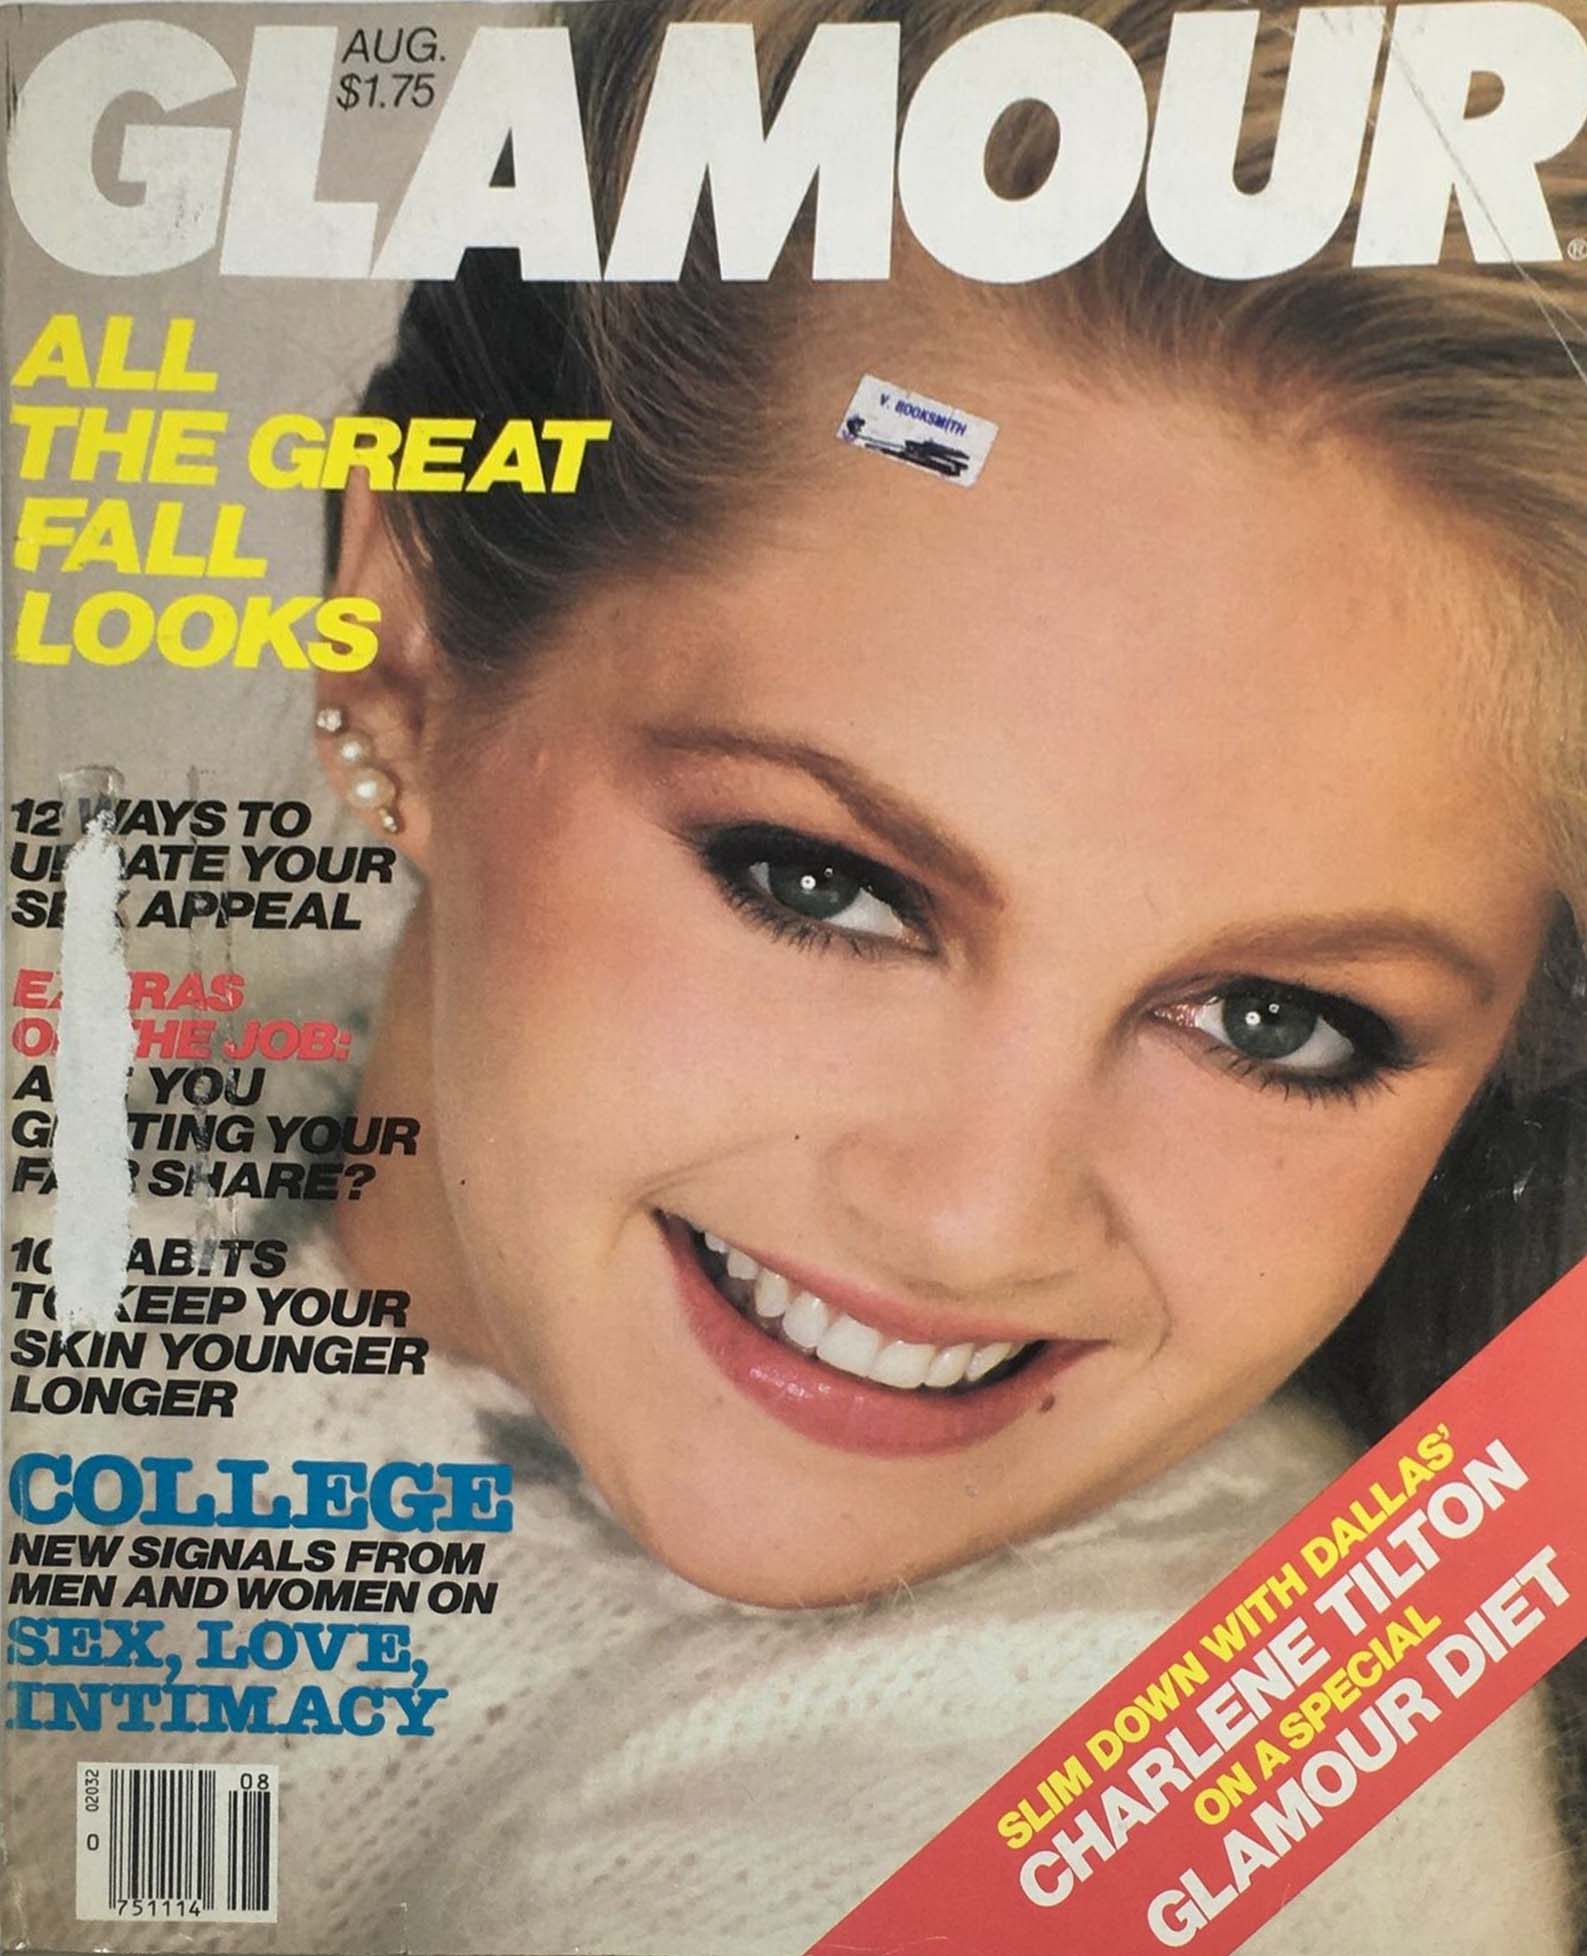 Glamour August 1981 magazine back issue Glamour magizine back copy Glamour August 1981 Womens Magazine Back Issue Published by Conde Nast Publications. All The Great Fall Looks.